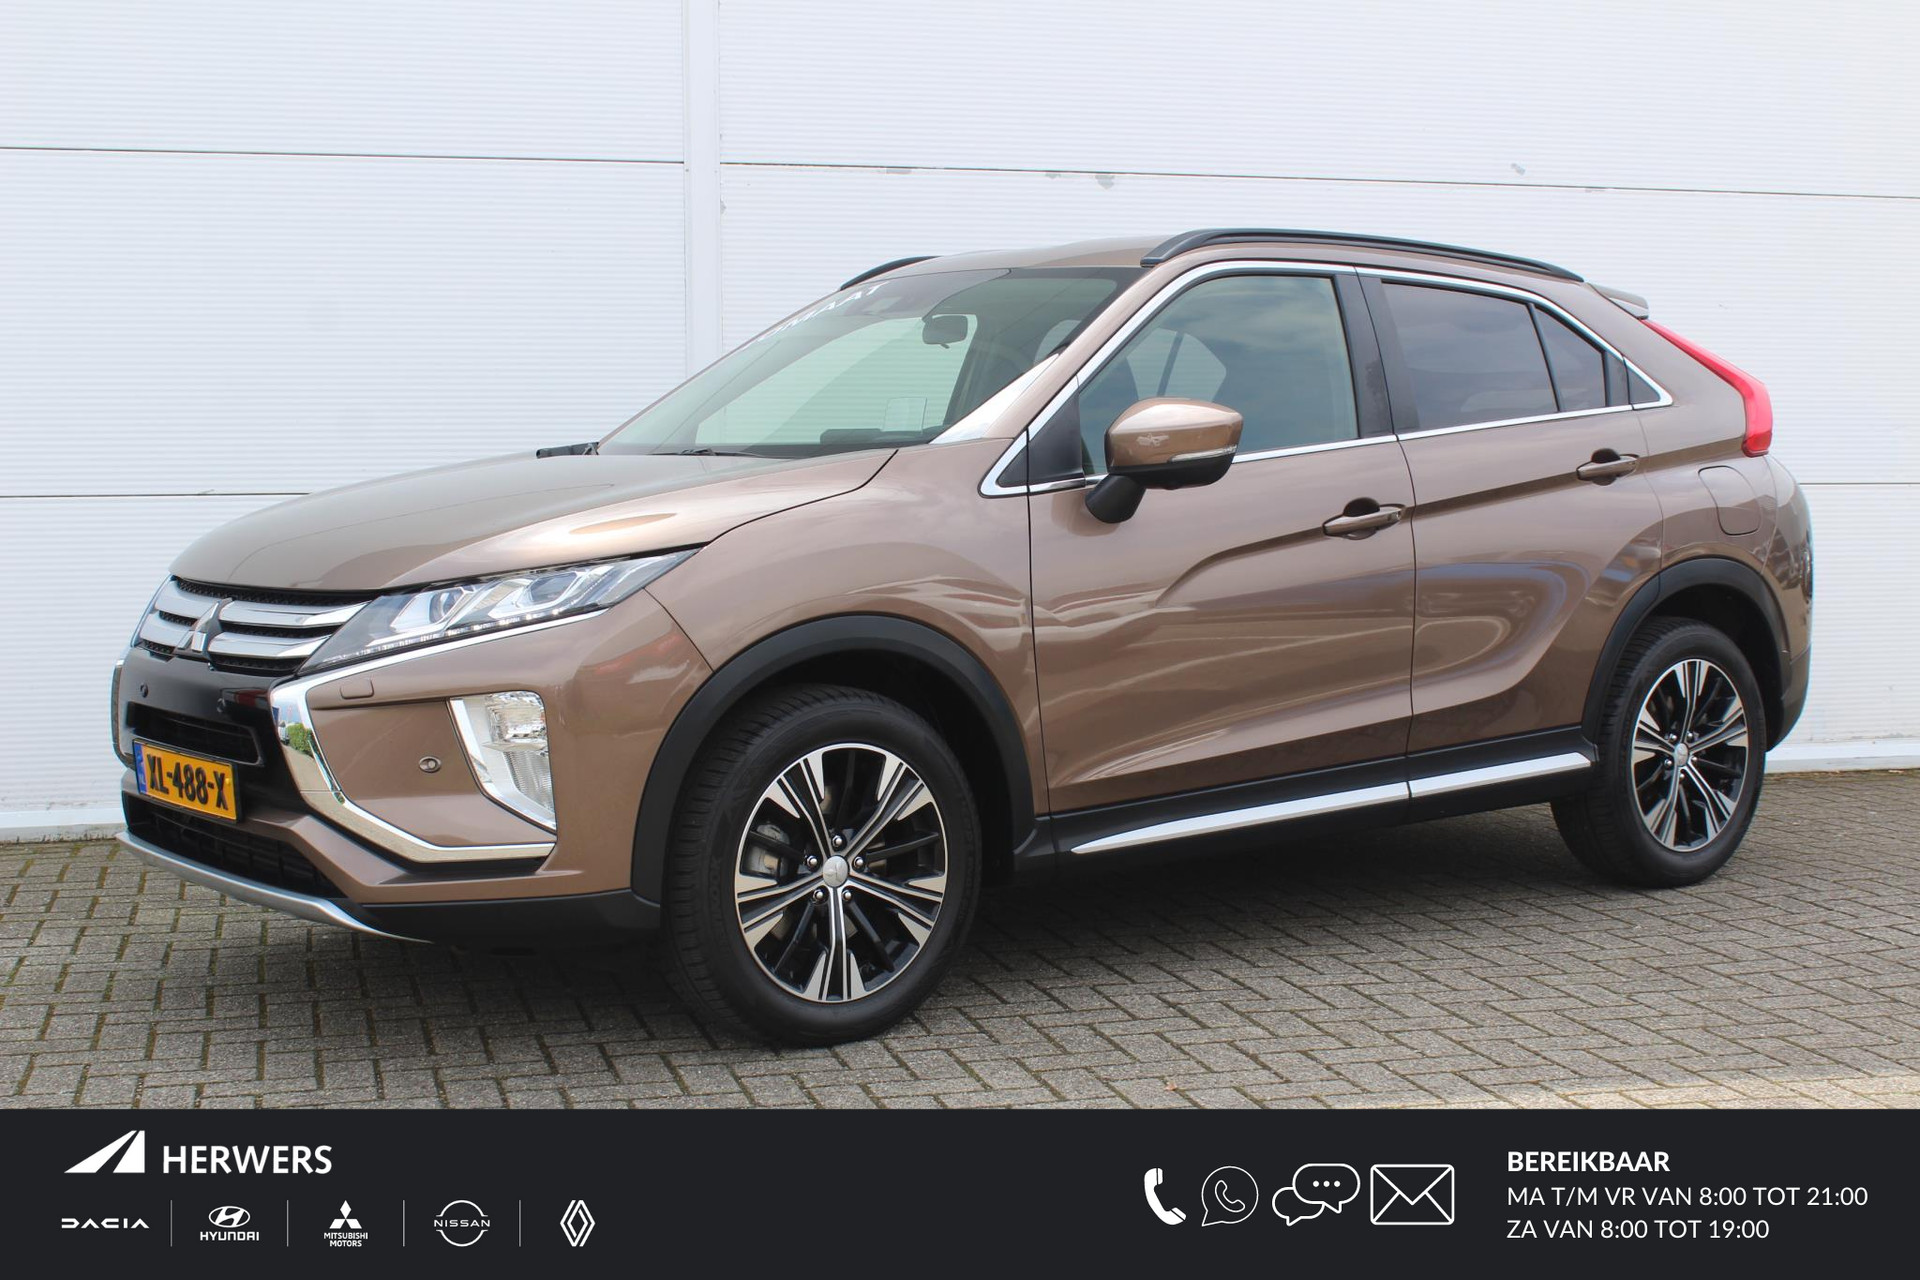 Mitsubishi Eclipse Cross 1.5 DI-T First Edition AUTOMAAT / Trekhaak (1600 KG) / Apple Carplay/Android Auto / 360* Camera / Cruise Control / Stoelverwarming Voor /